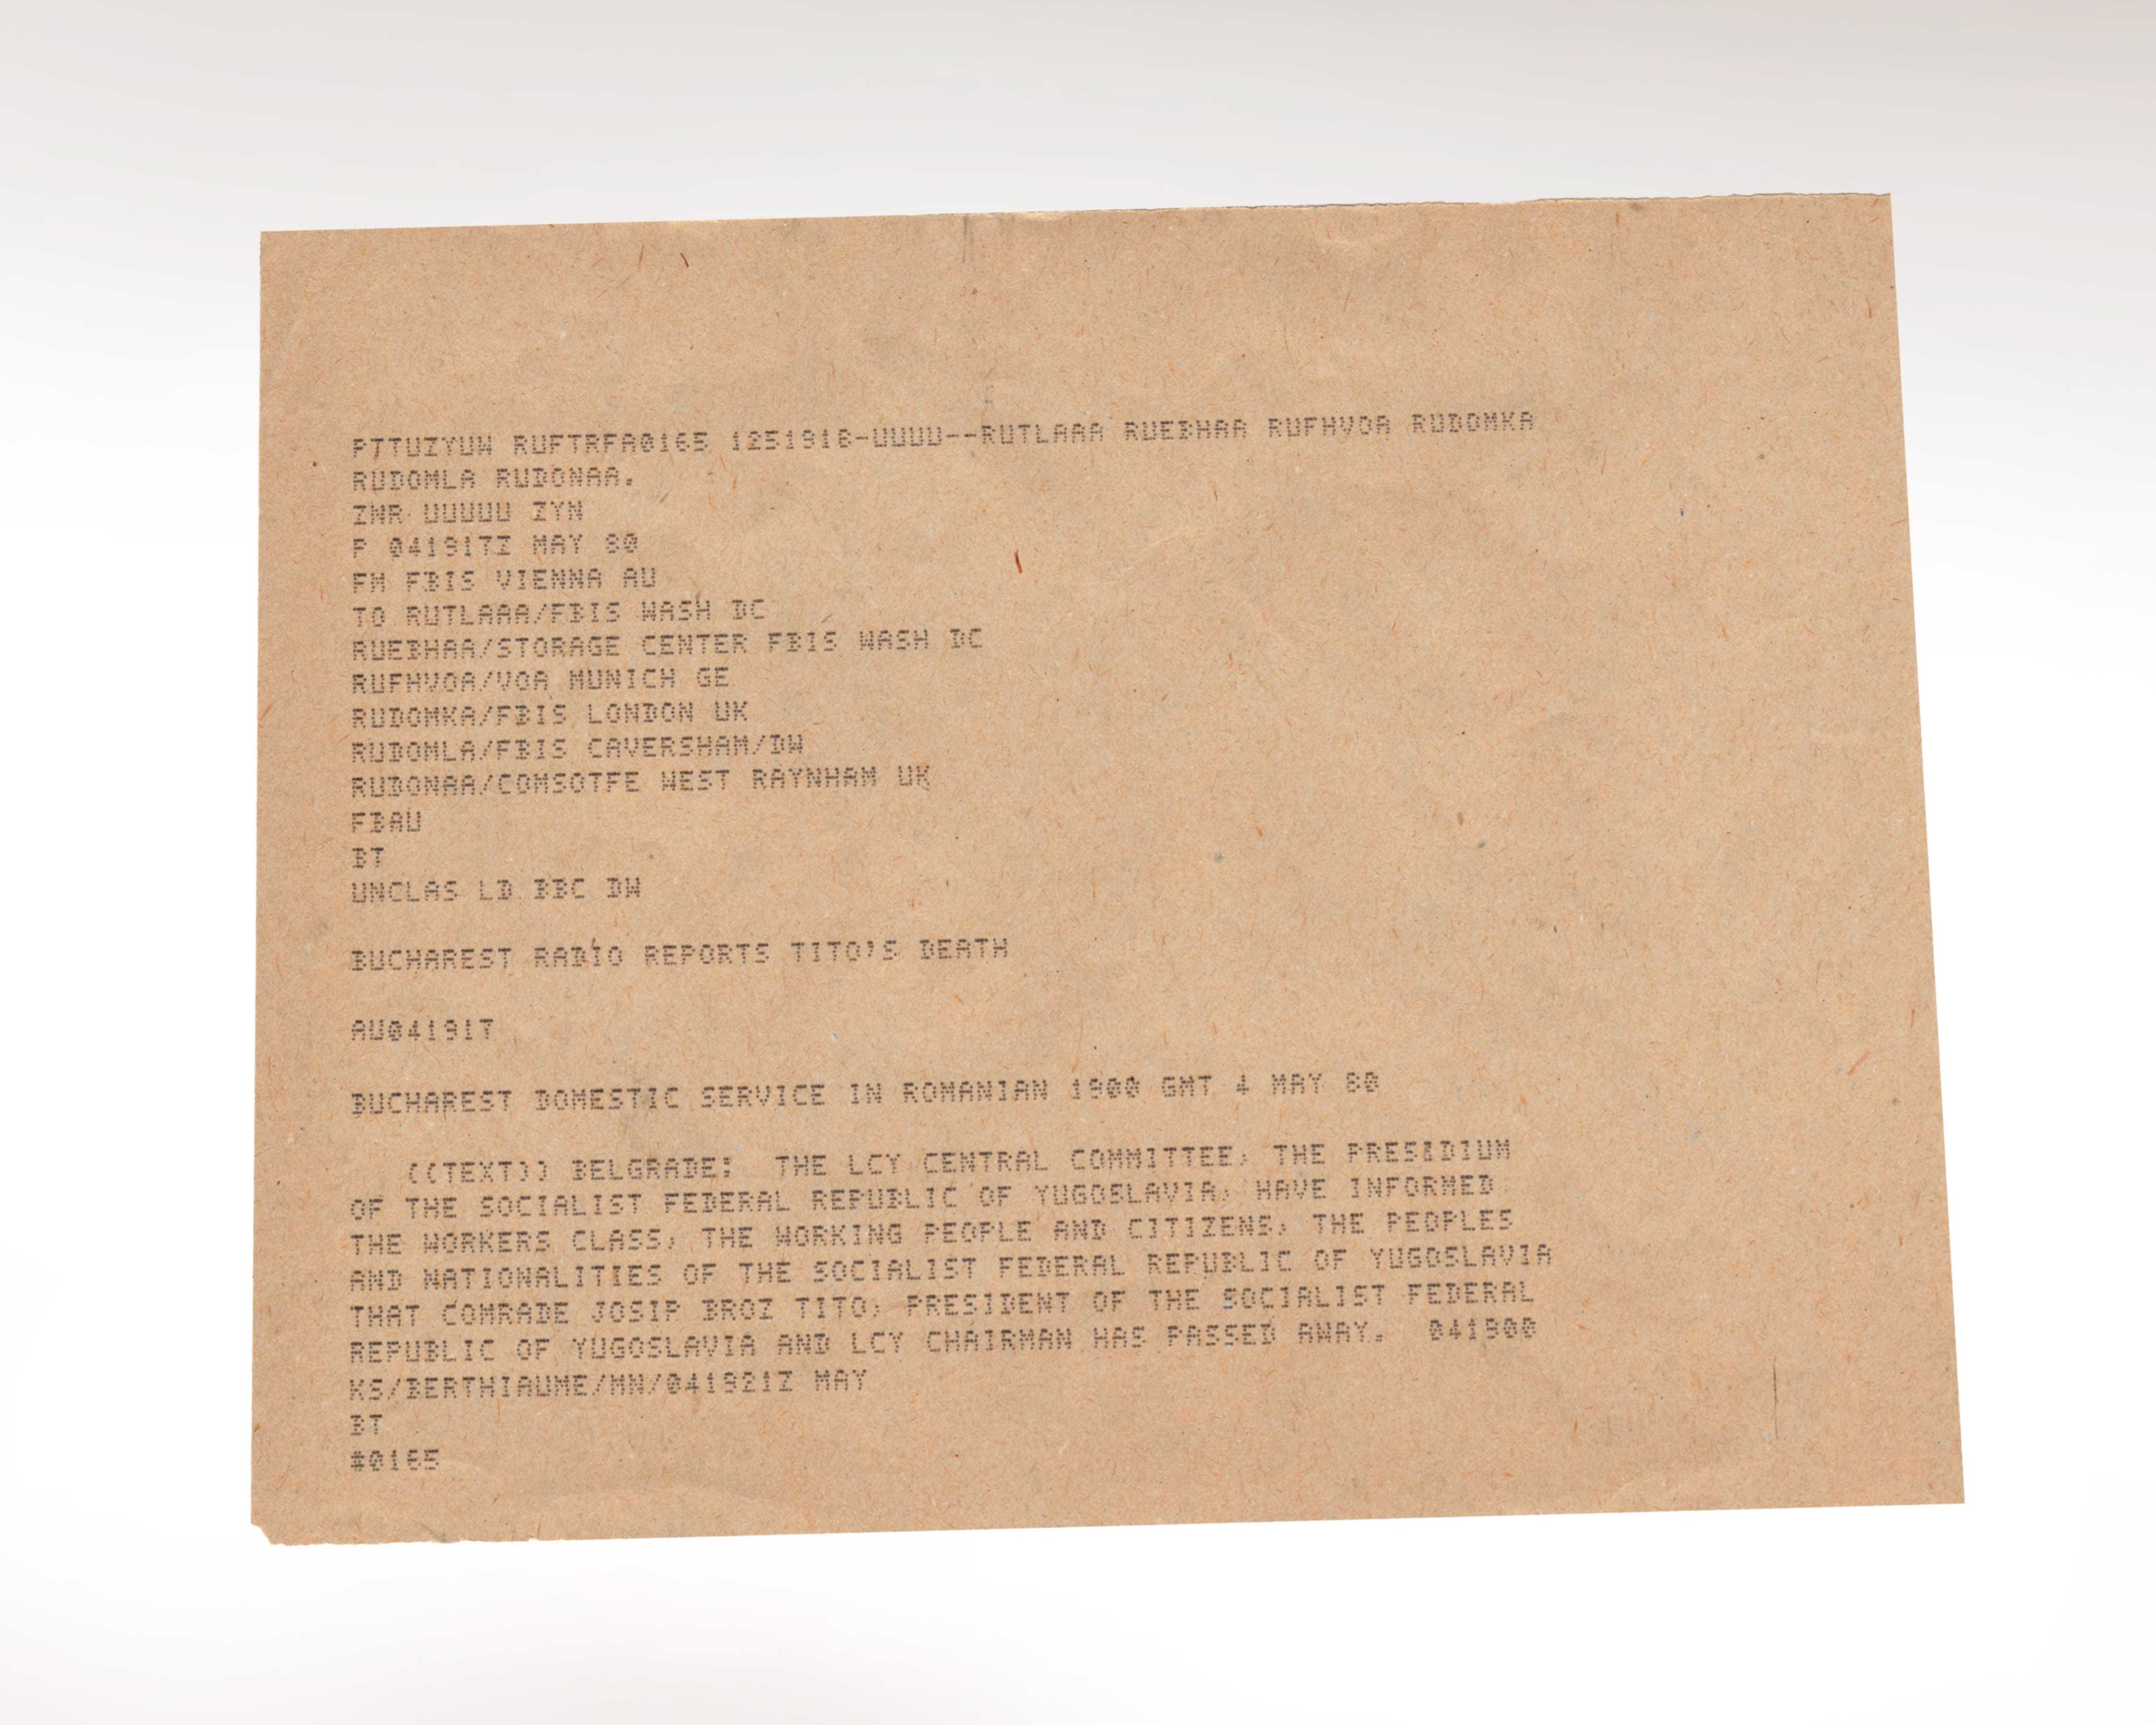 A short, typed message from the FBIS on a brown card